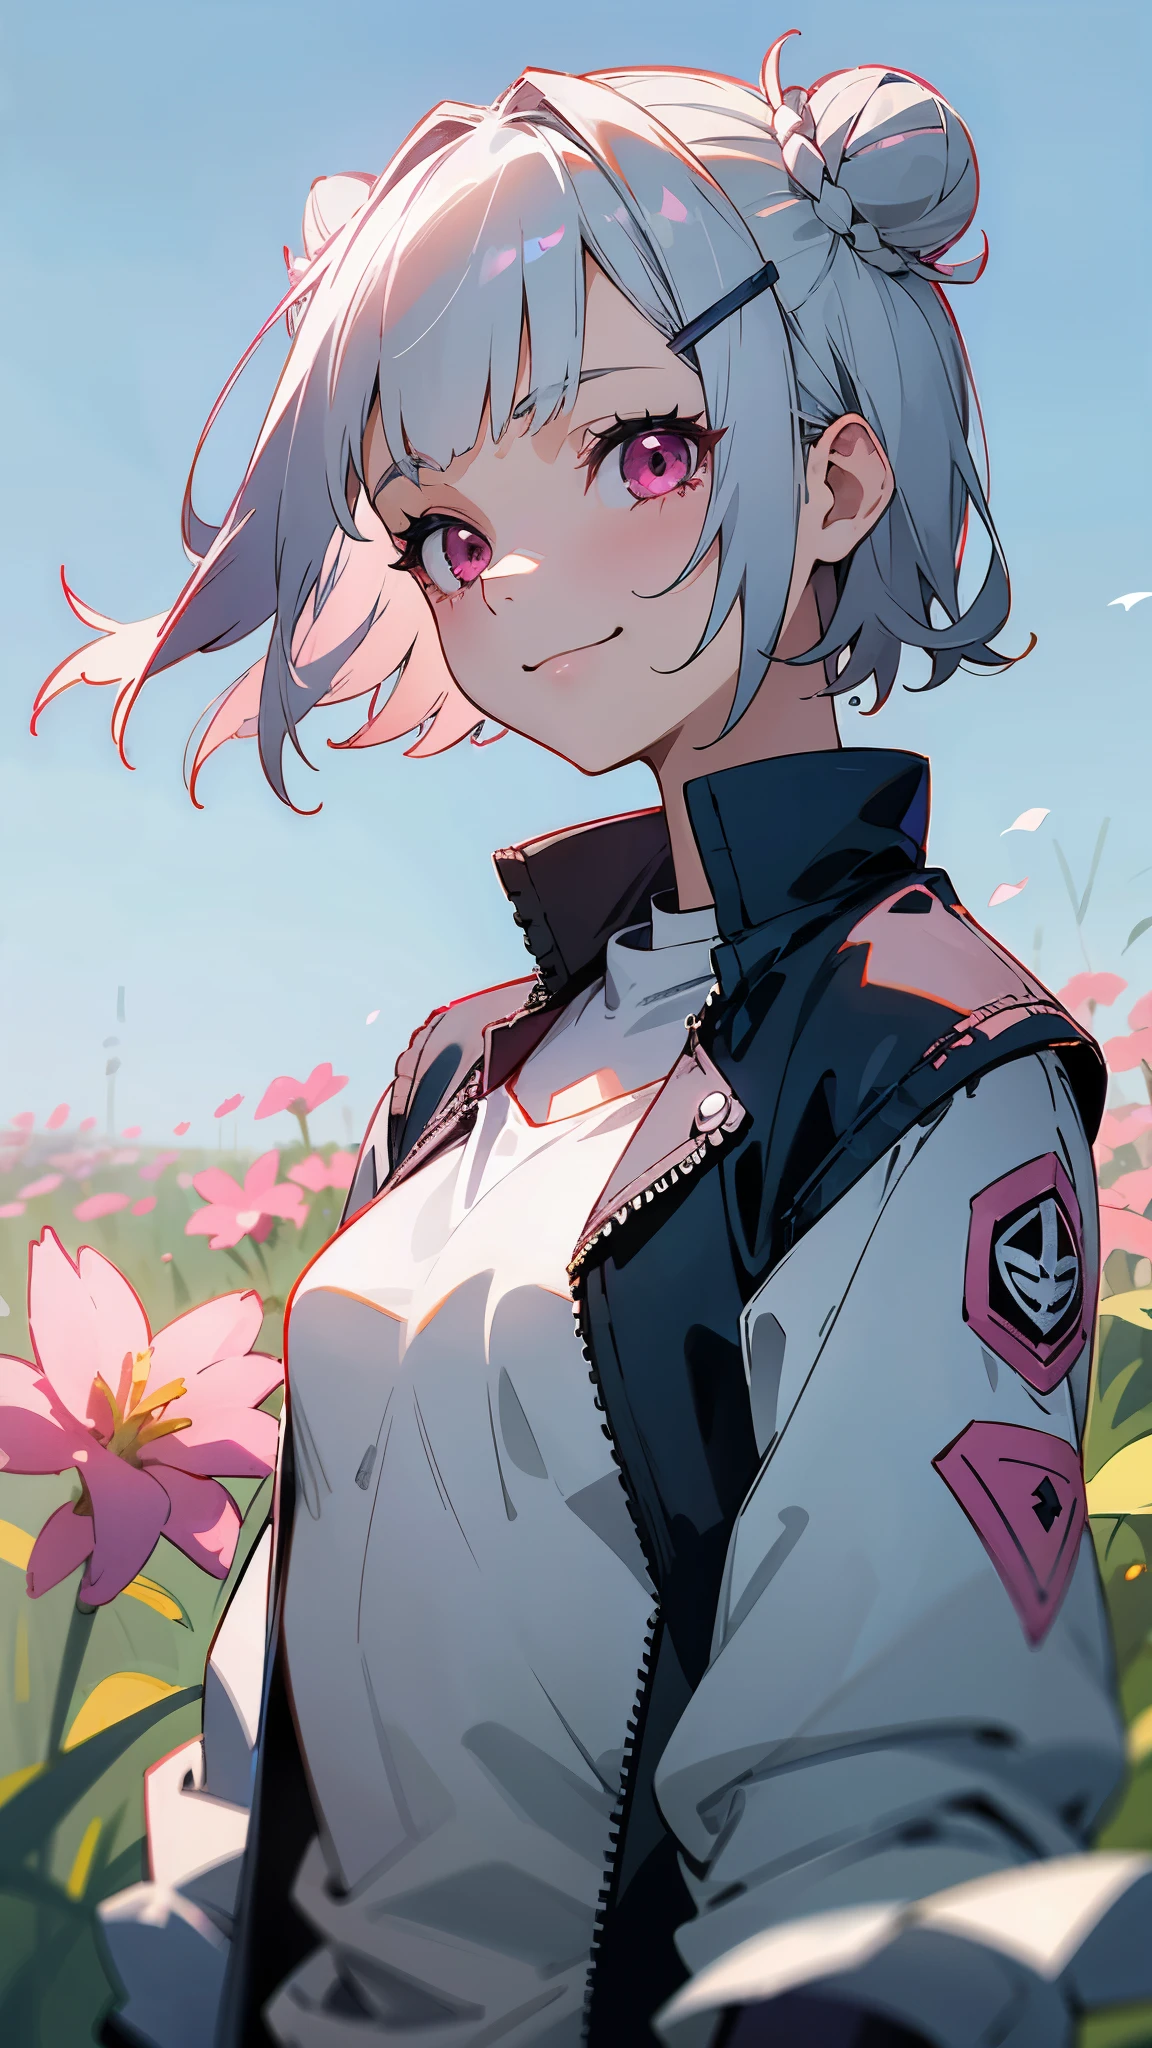 1 girl、riders jacket、small breasts、Silver short bob hair clip tied into a bun、shining pink eyes、From the side、gloves、evil smile、A meadow full of flowers、blown by the wind、blue sky、upper body close-up、sharp outline